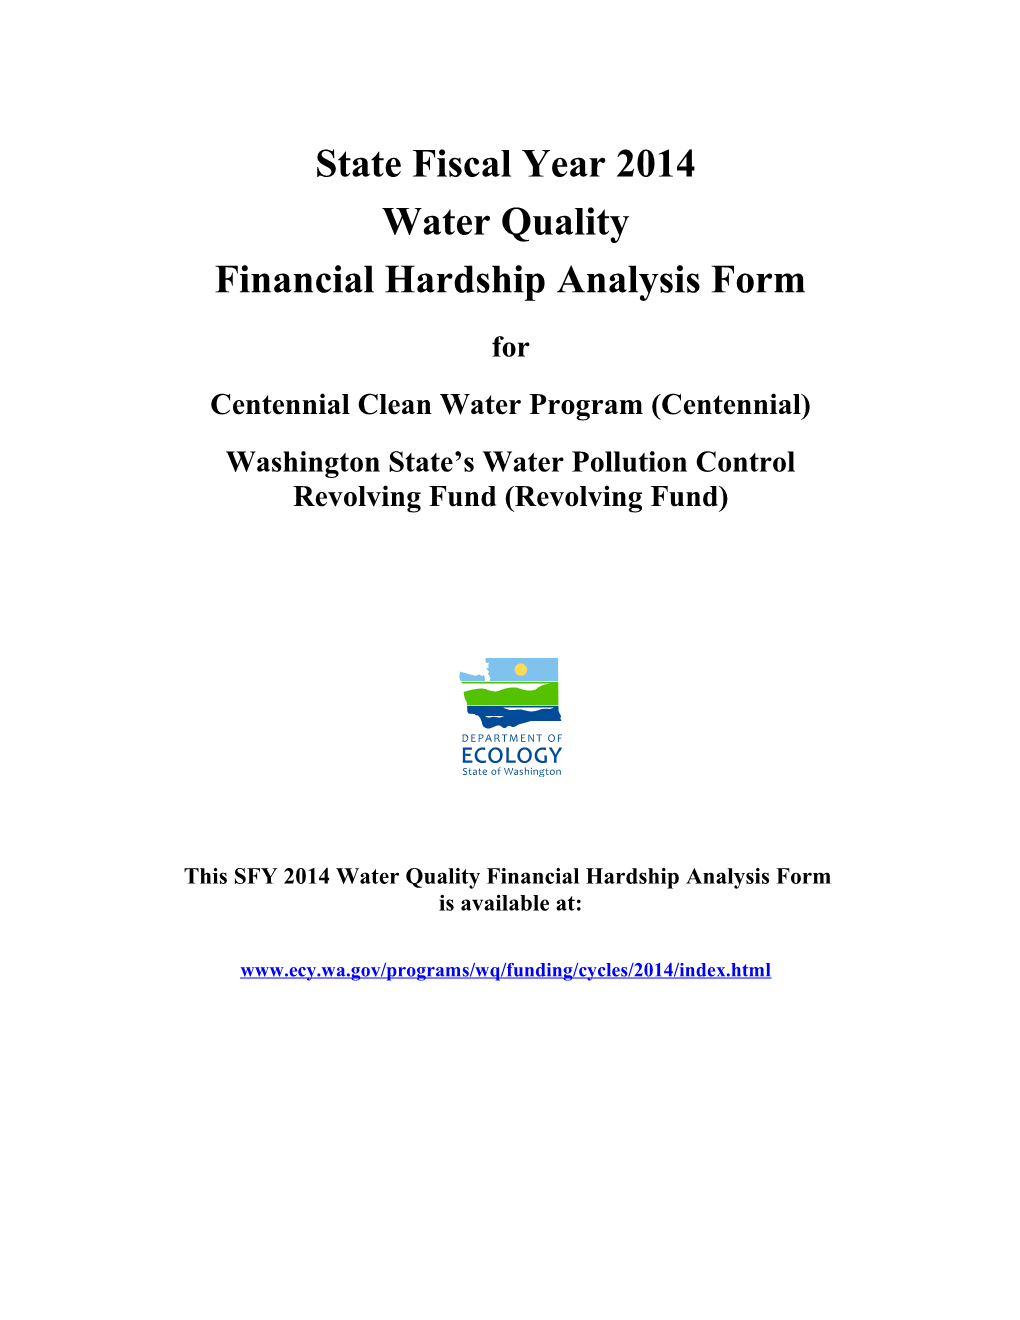 State Fiscal Year 2013 Water Quality Financial Hardship Analysis Form